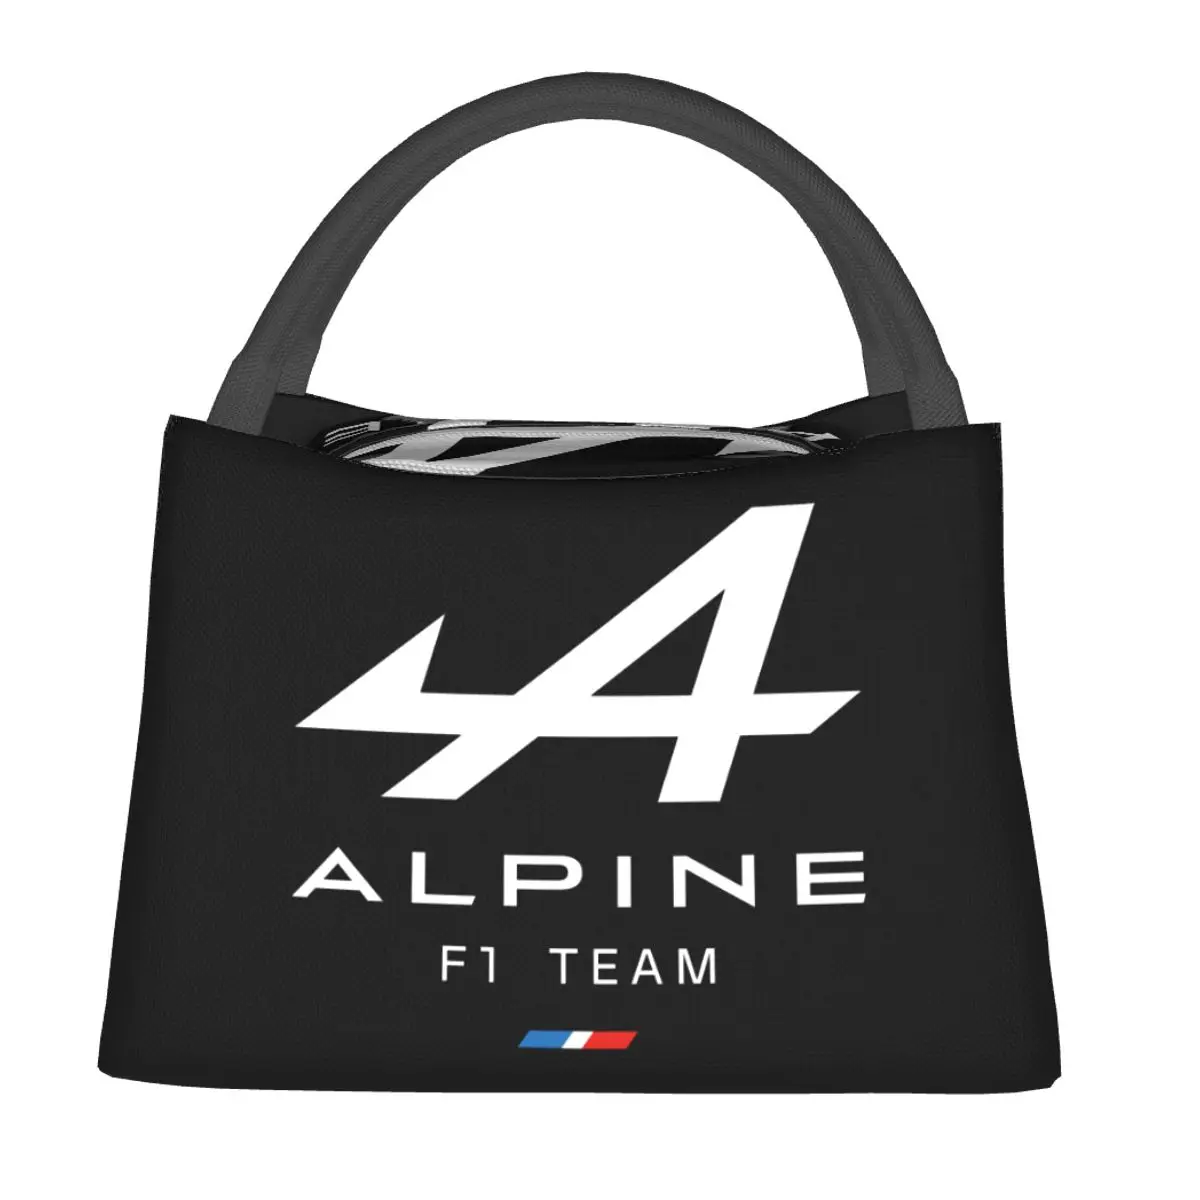 Alpine F1 Team Logo Men Lunch Bags Insulated Cooler Portable Picnic Travel Canvas Tote Food Bag